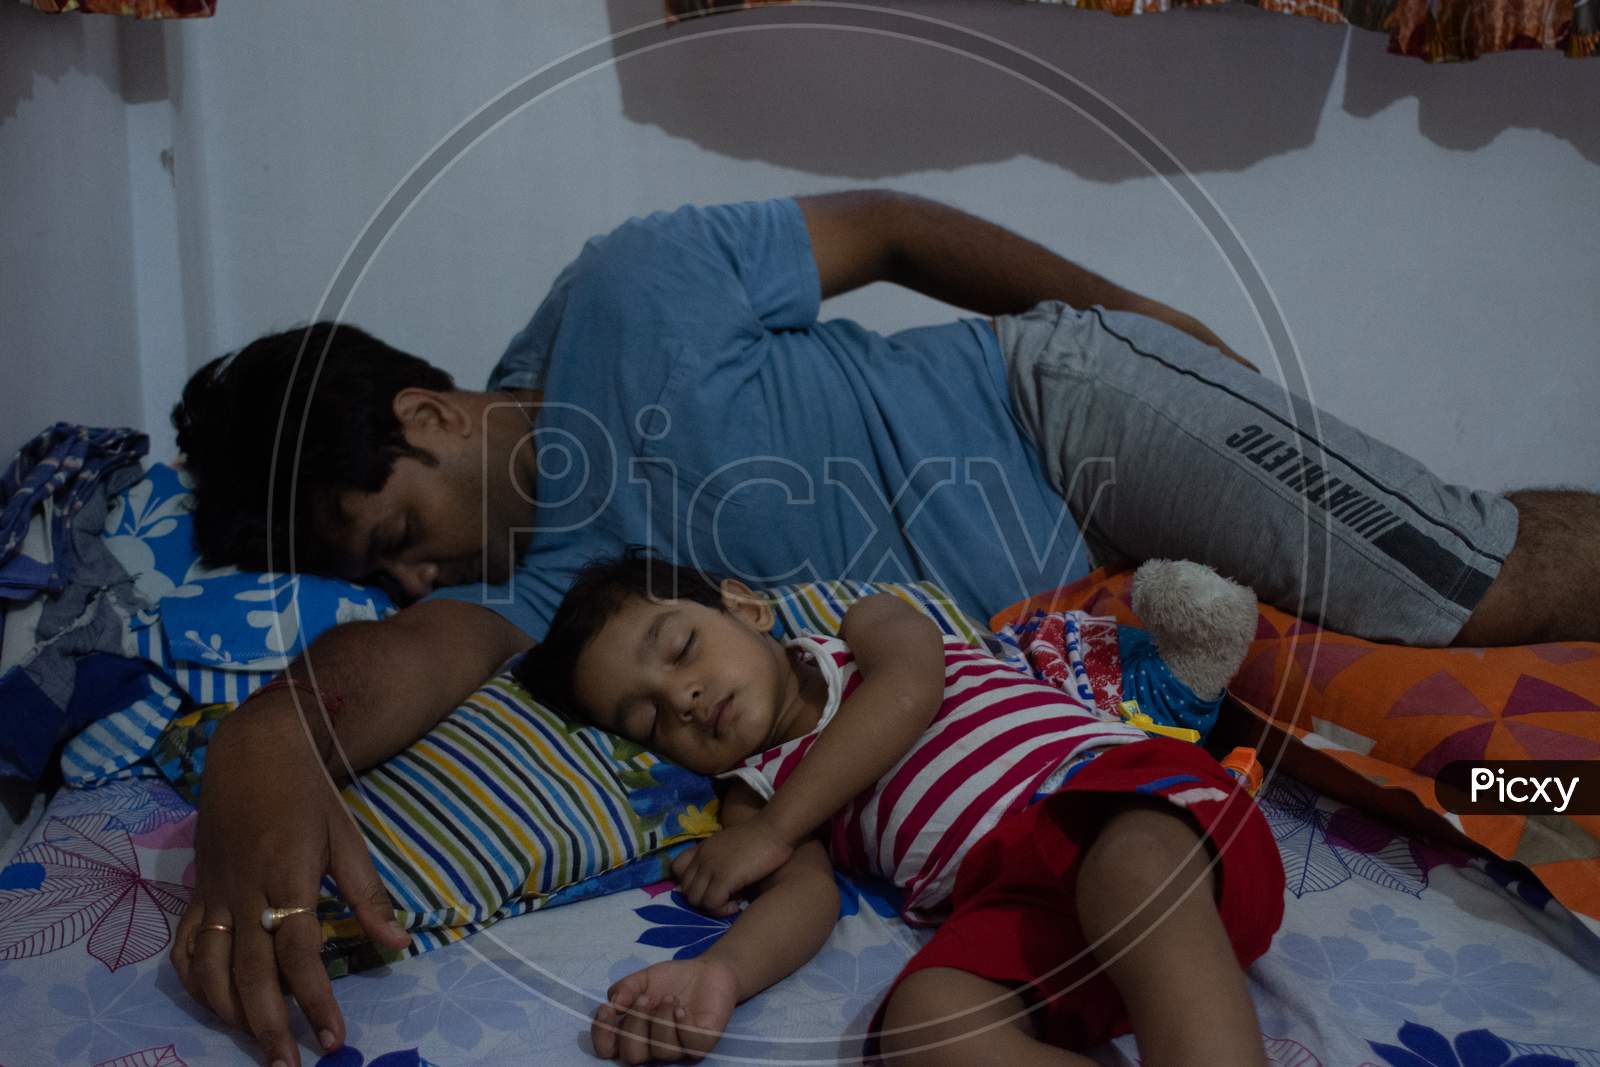 father and son sleeping together in same style. Indian family